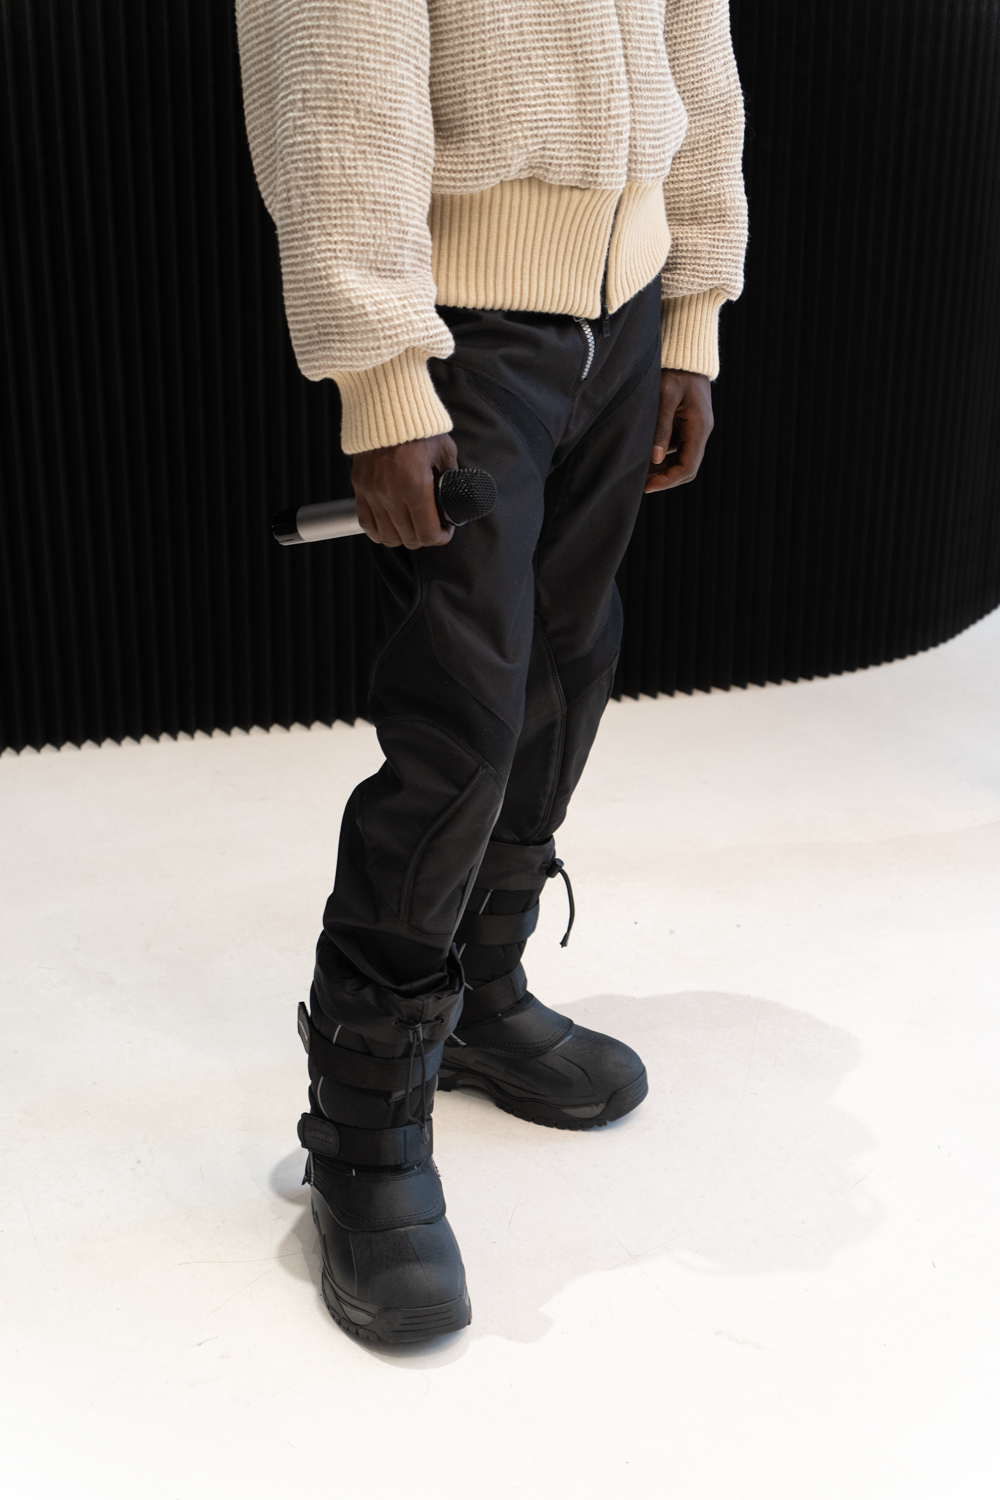 A close-up photo of a model standing in a fashion showroom wearing clothing from the brand TARPLEY. The model is wearing black hiking pants and boots.